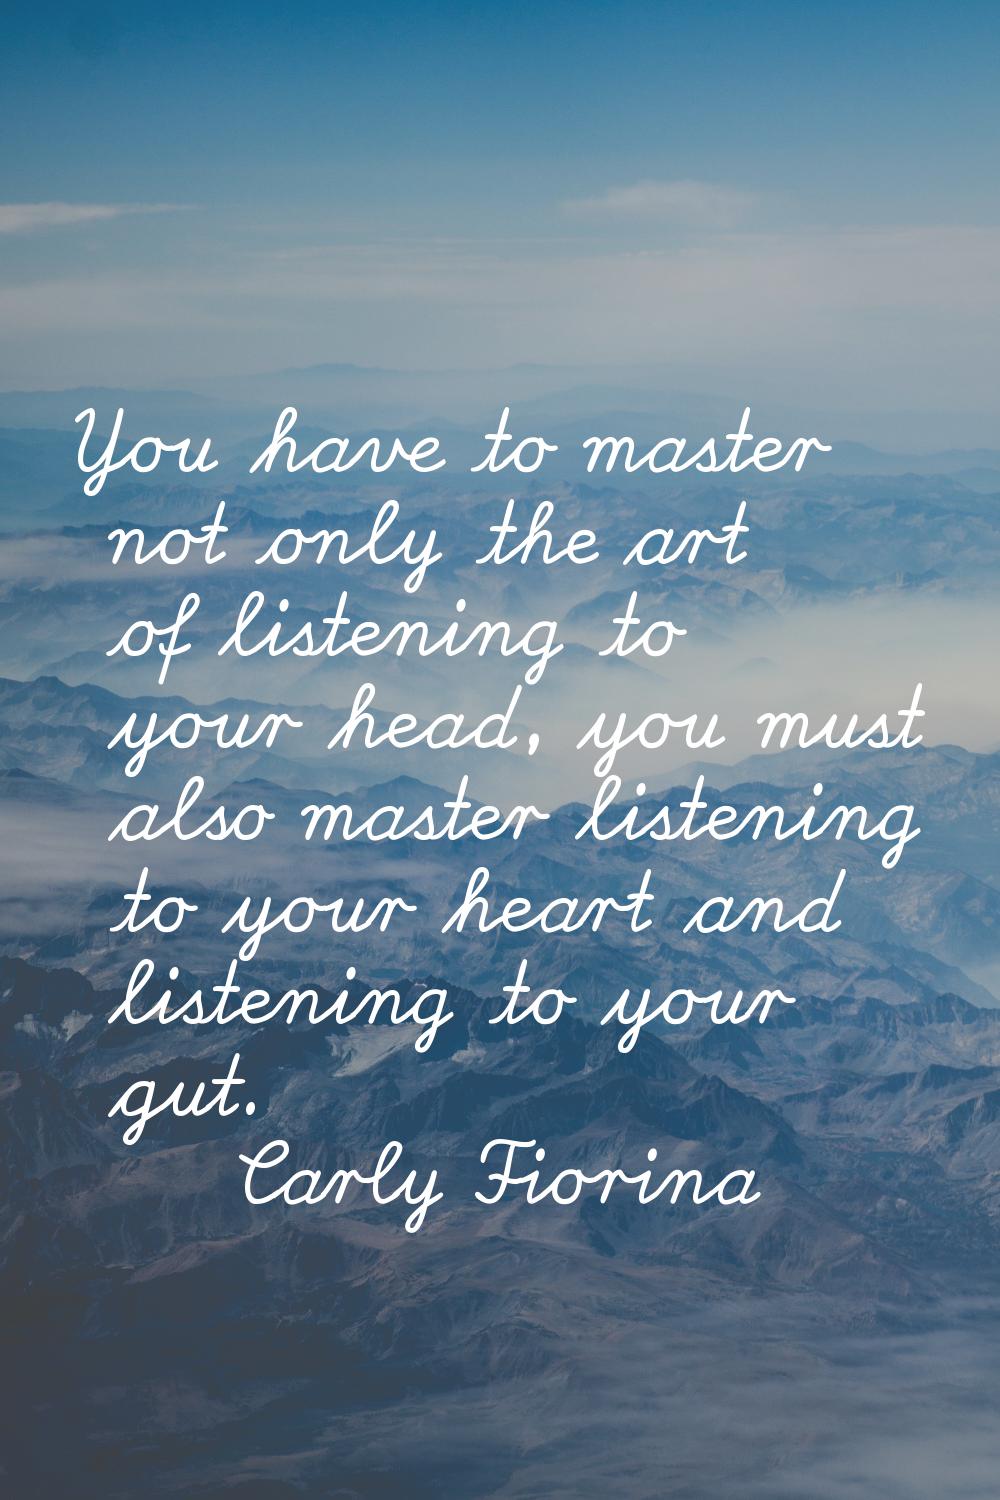 You have to master not only the art of listening to your head, you must also master listening to yo